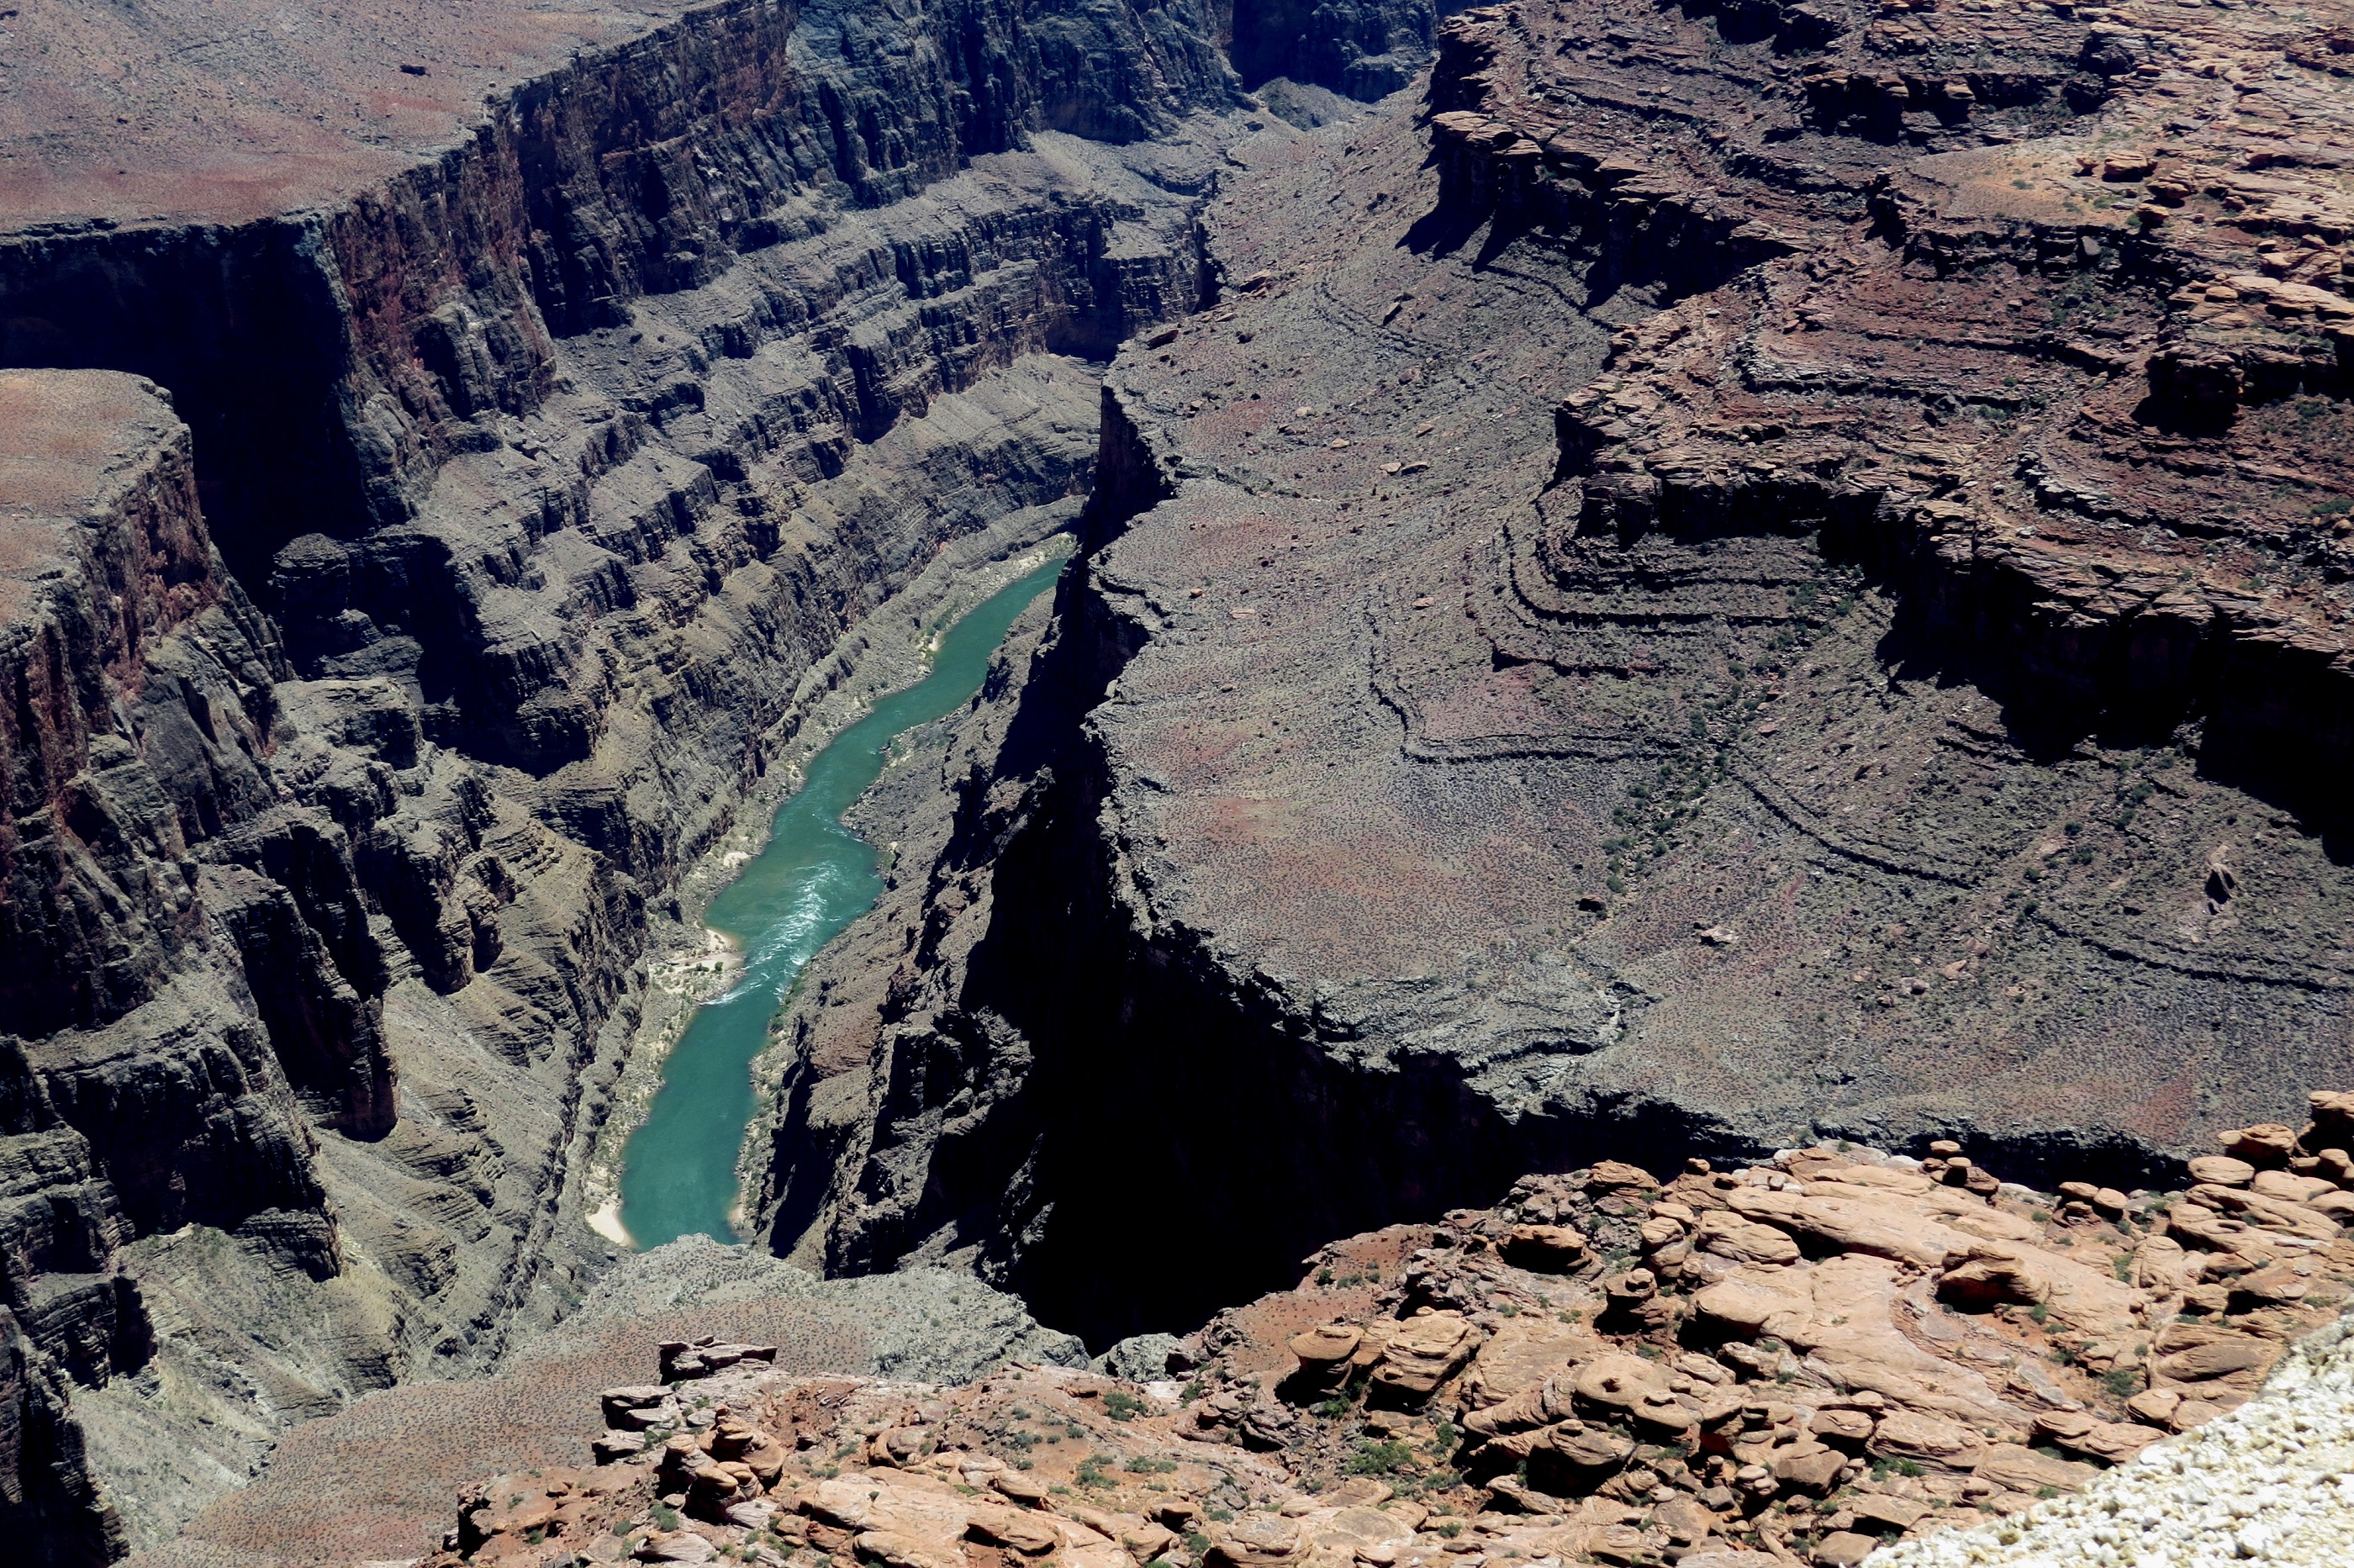 The Colorado River down in the Grand Canyon as seen from Kanab Point